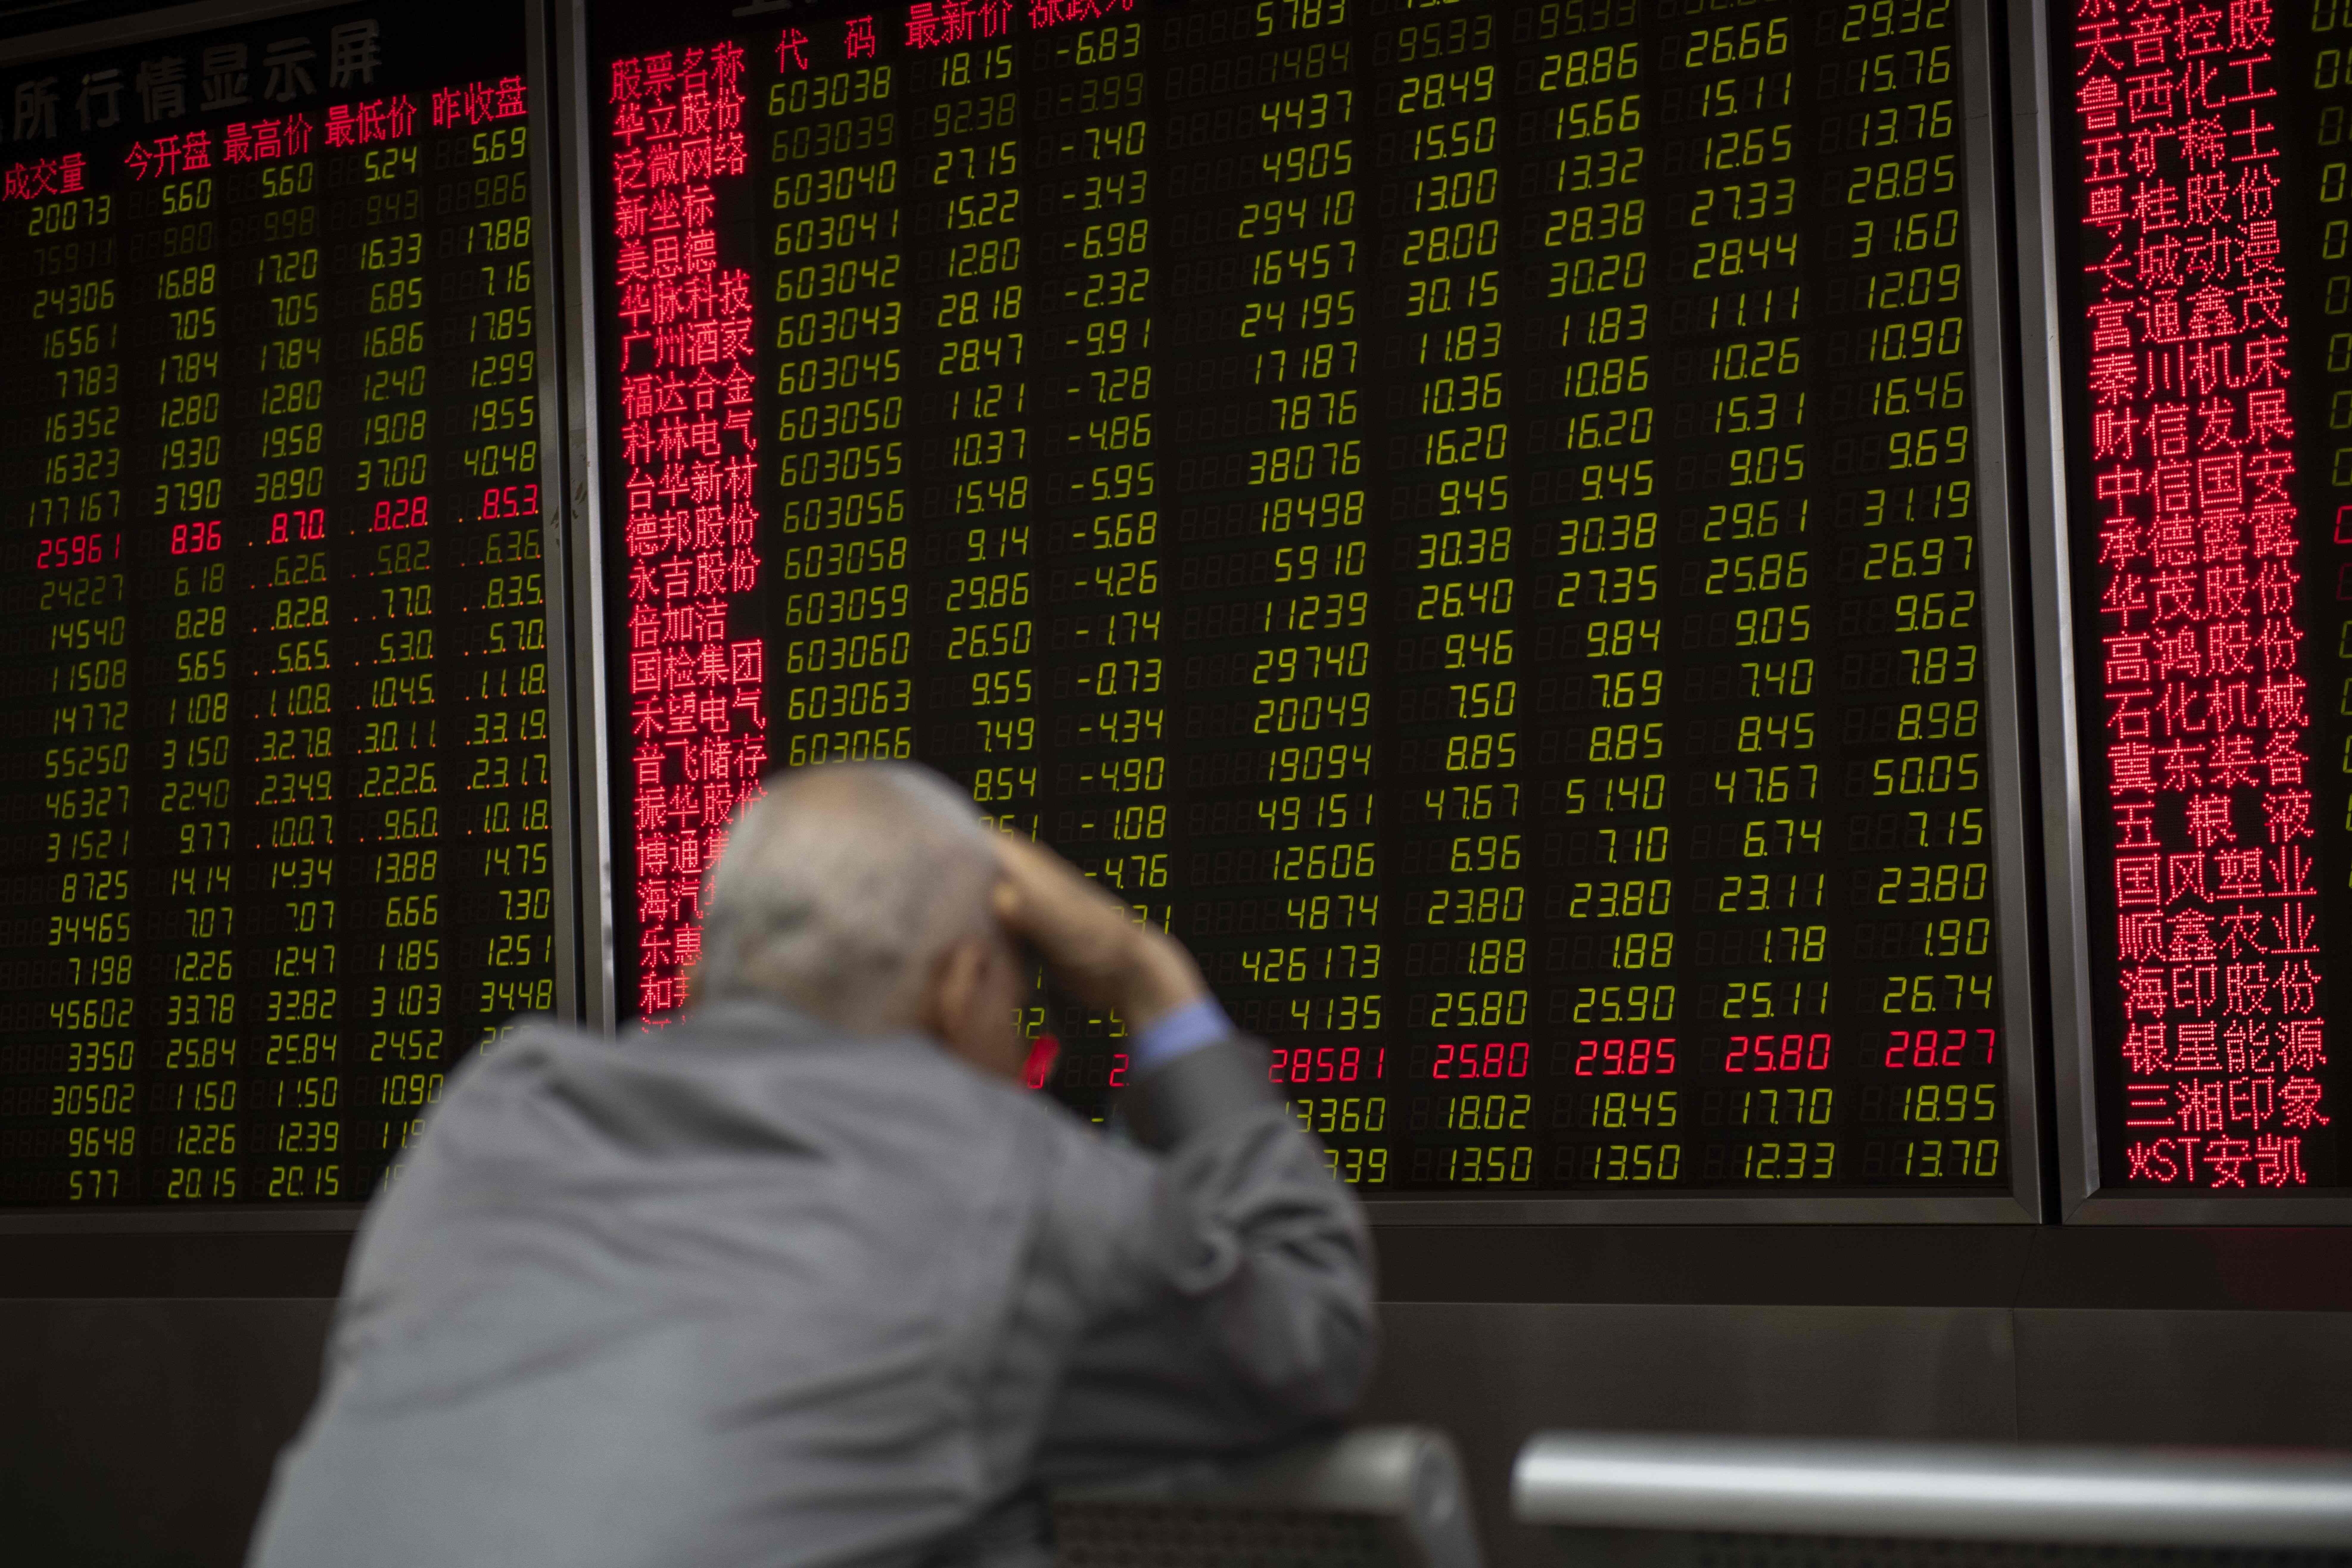 A stockbroking firm in Beijing on May 6, 2019. Contrary to global conventions, China denotes losses and declines in green, using red to represent gains and advances in the stock market. Photo: AFP